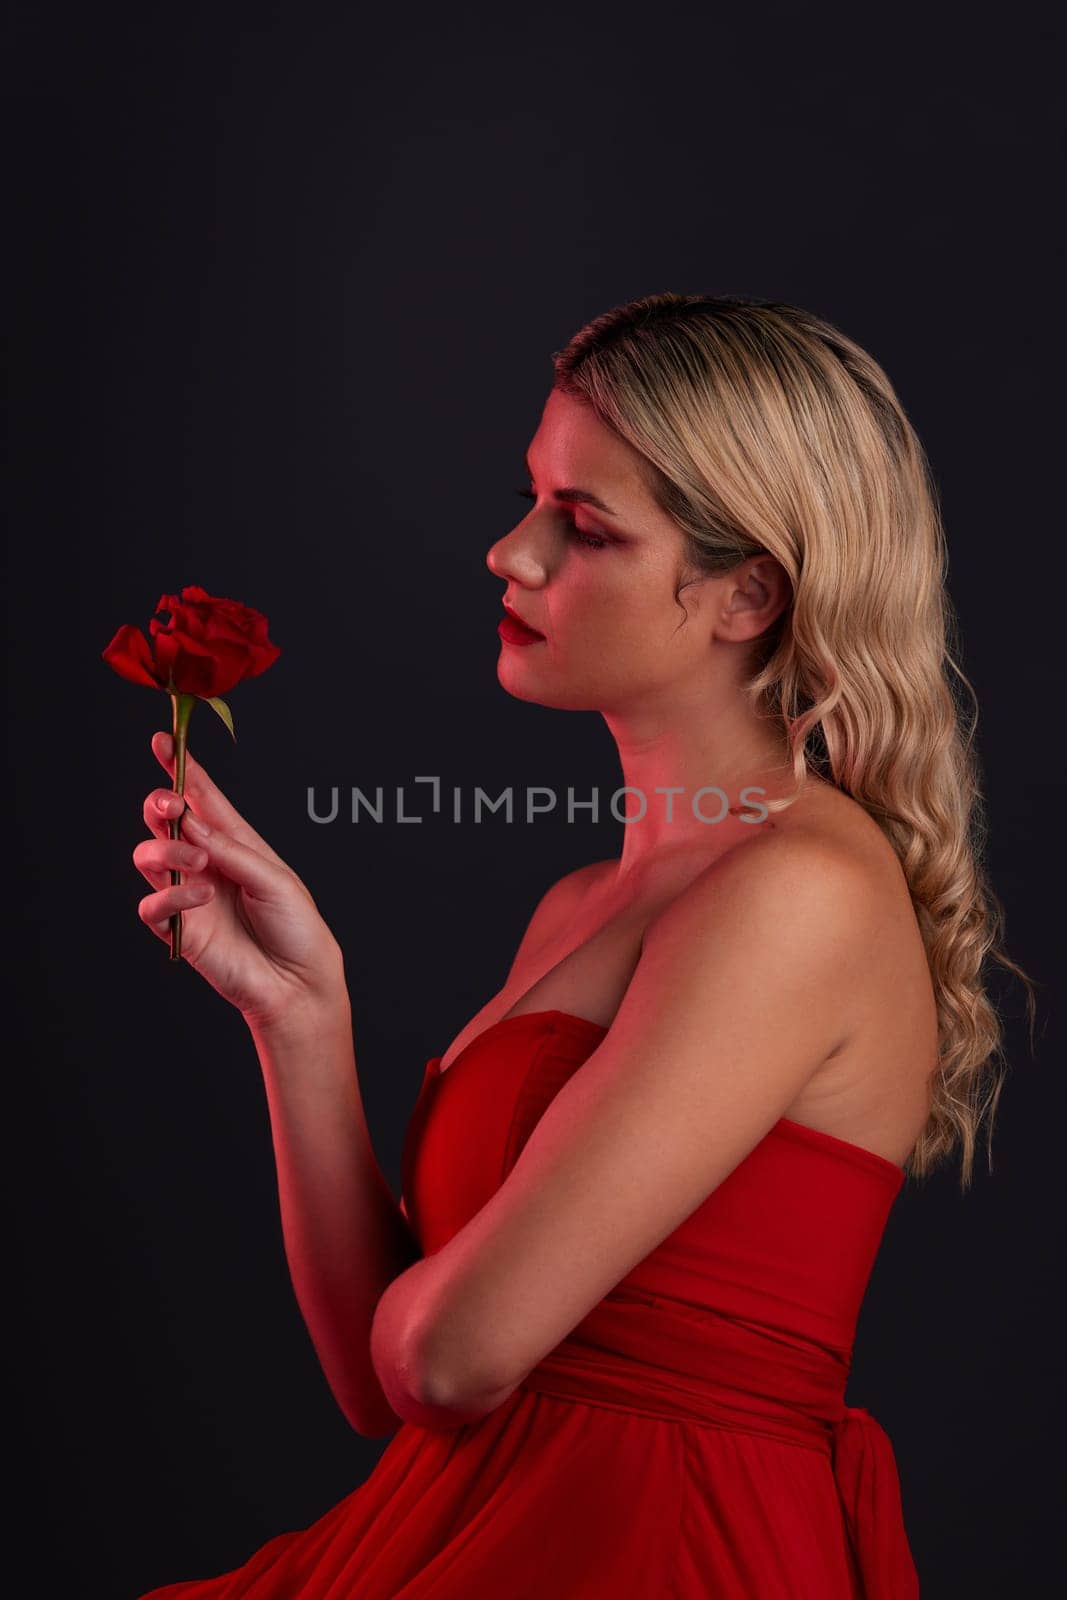 Beauty, fashion and woman with a rose on a dark, black background in a studio thinking of love, romance or red aesthetic. Girl with a flower, dress and formal style in fantasy, fairytale or art.